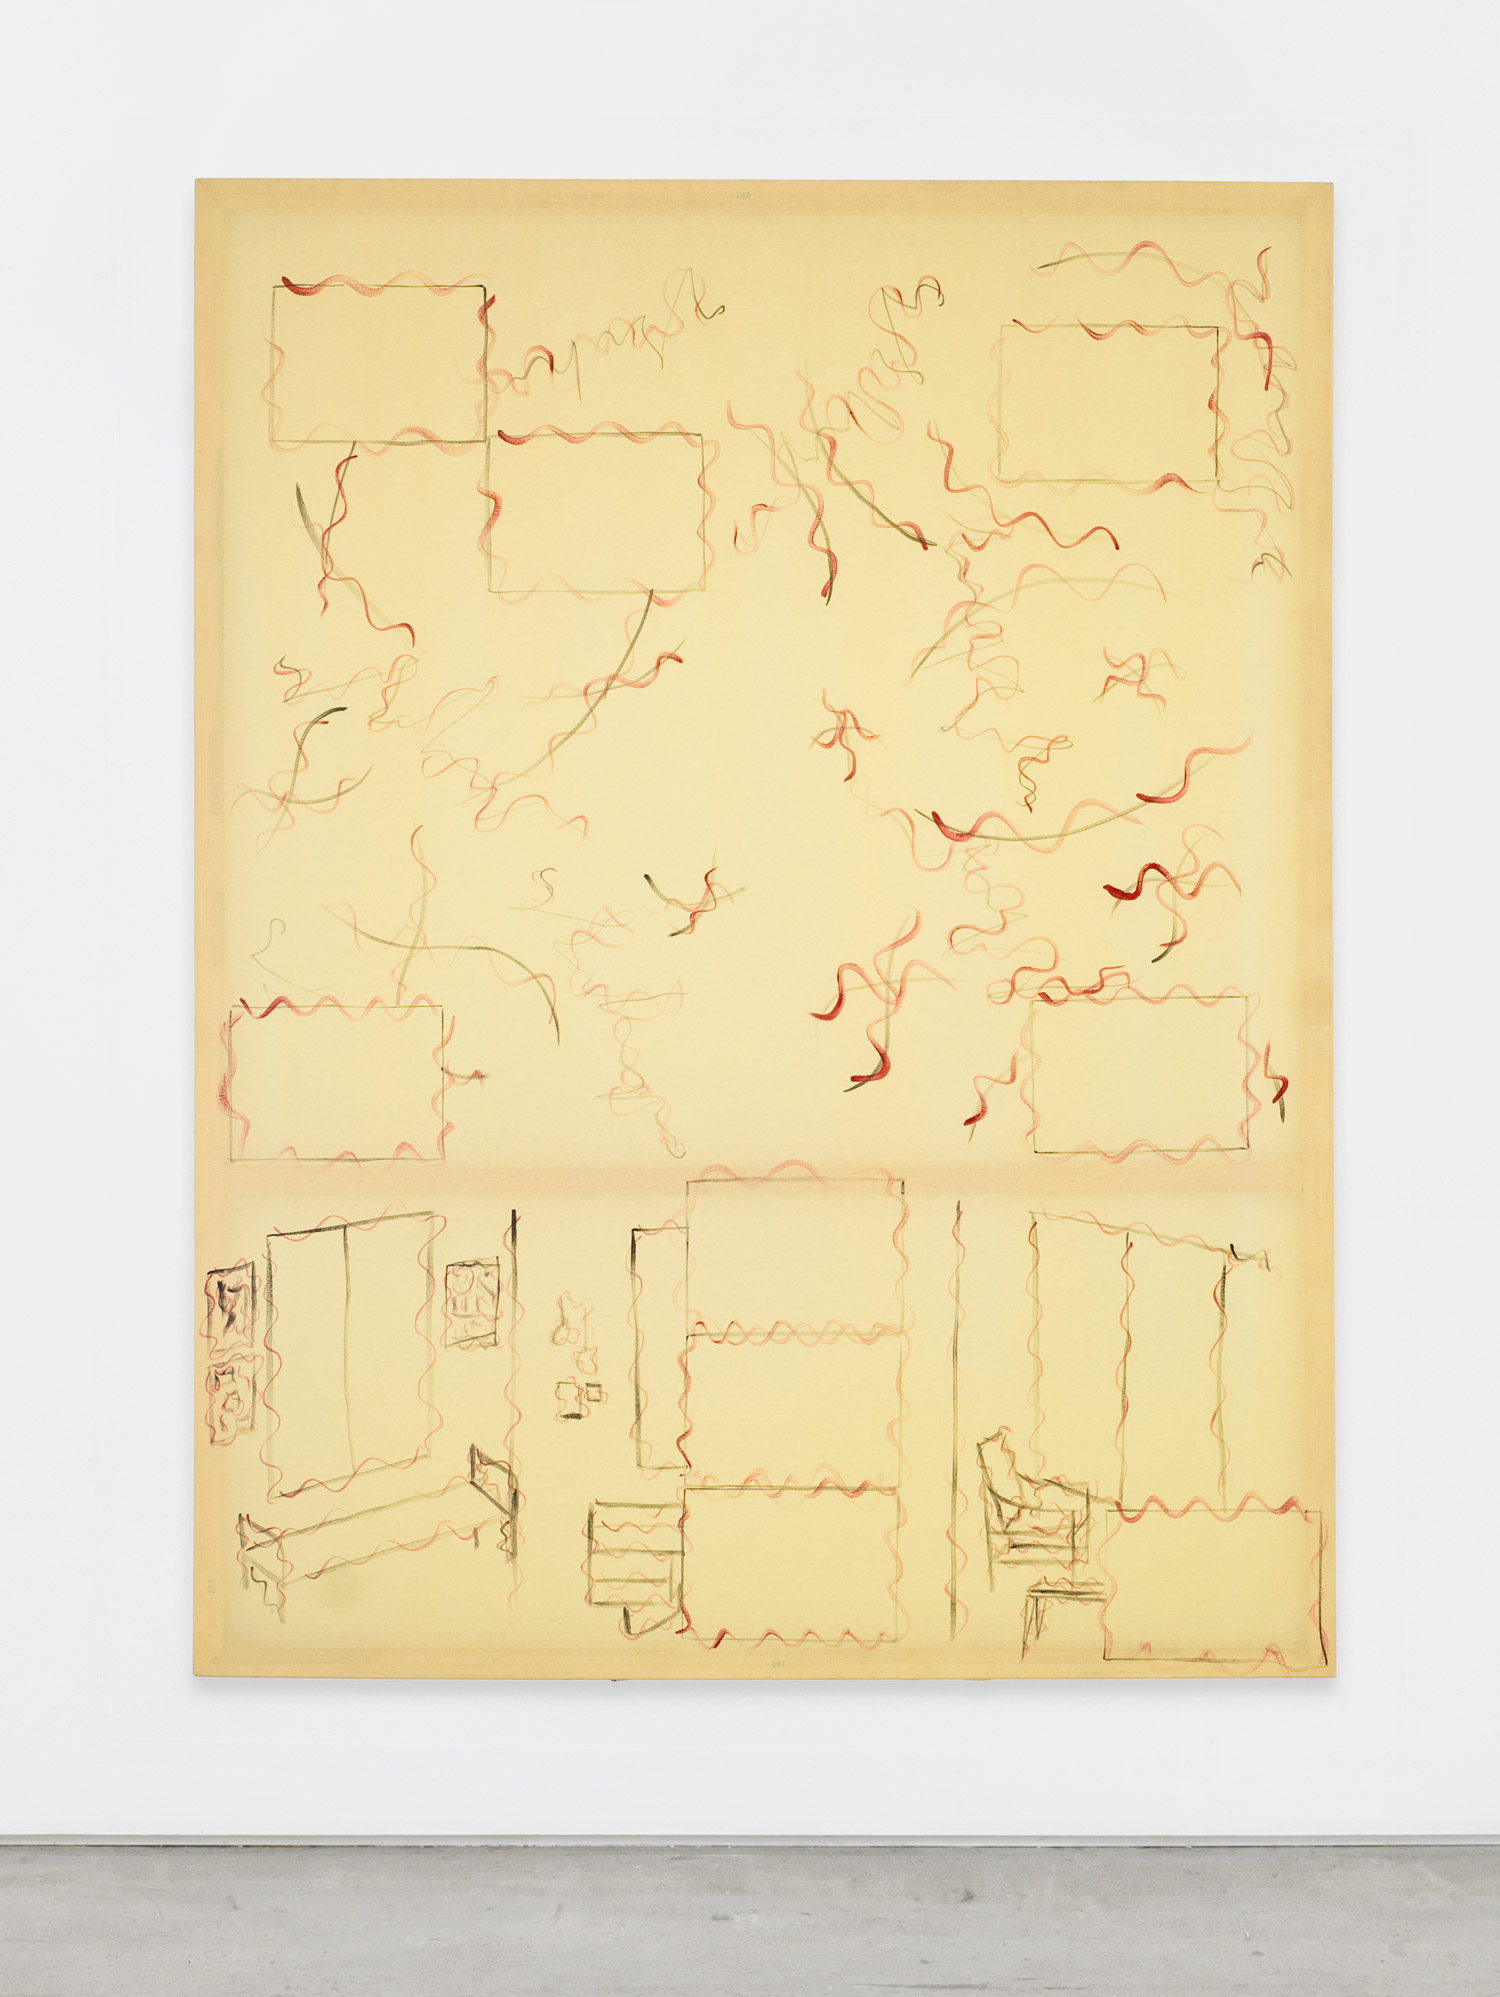 Gerda Scheepers, Scenes and skills, 2009, acrylic paint on fabric, 82.68h x 62.99w in.